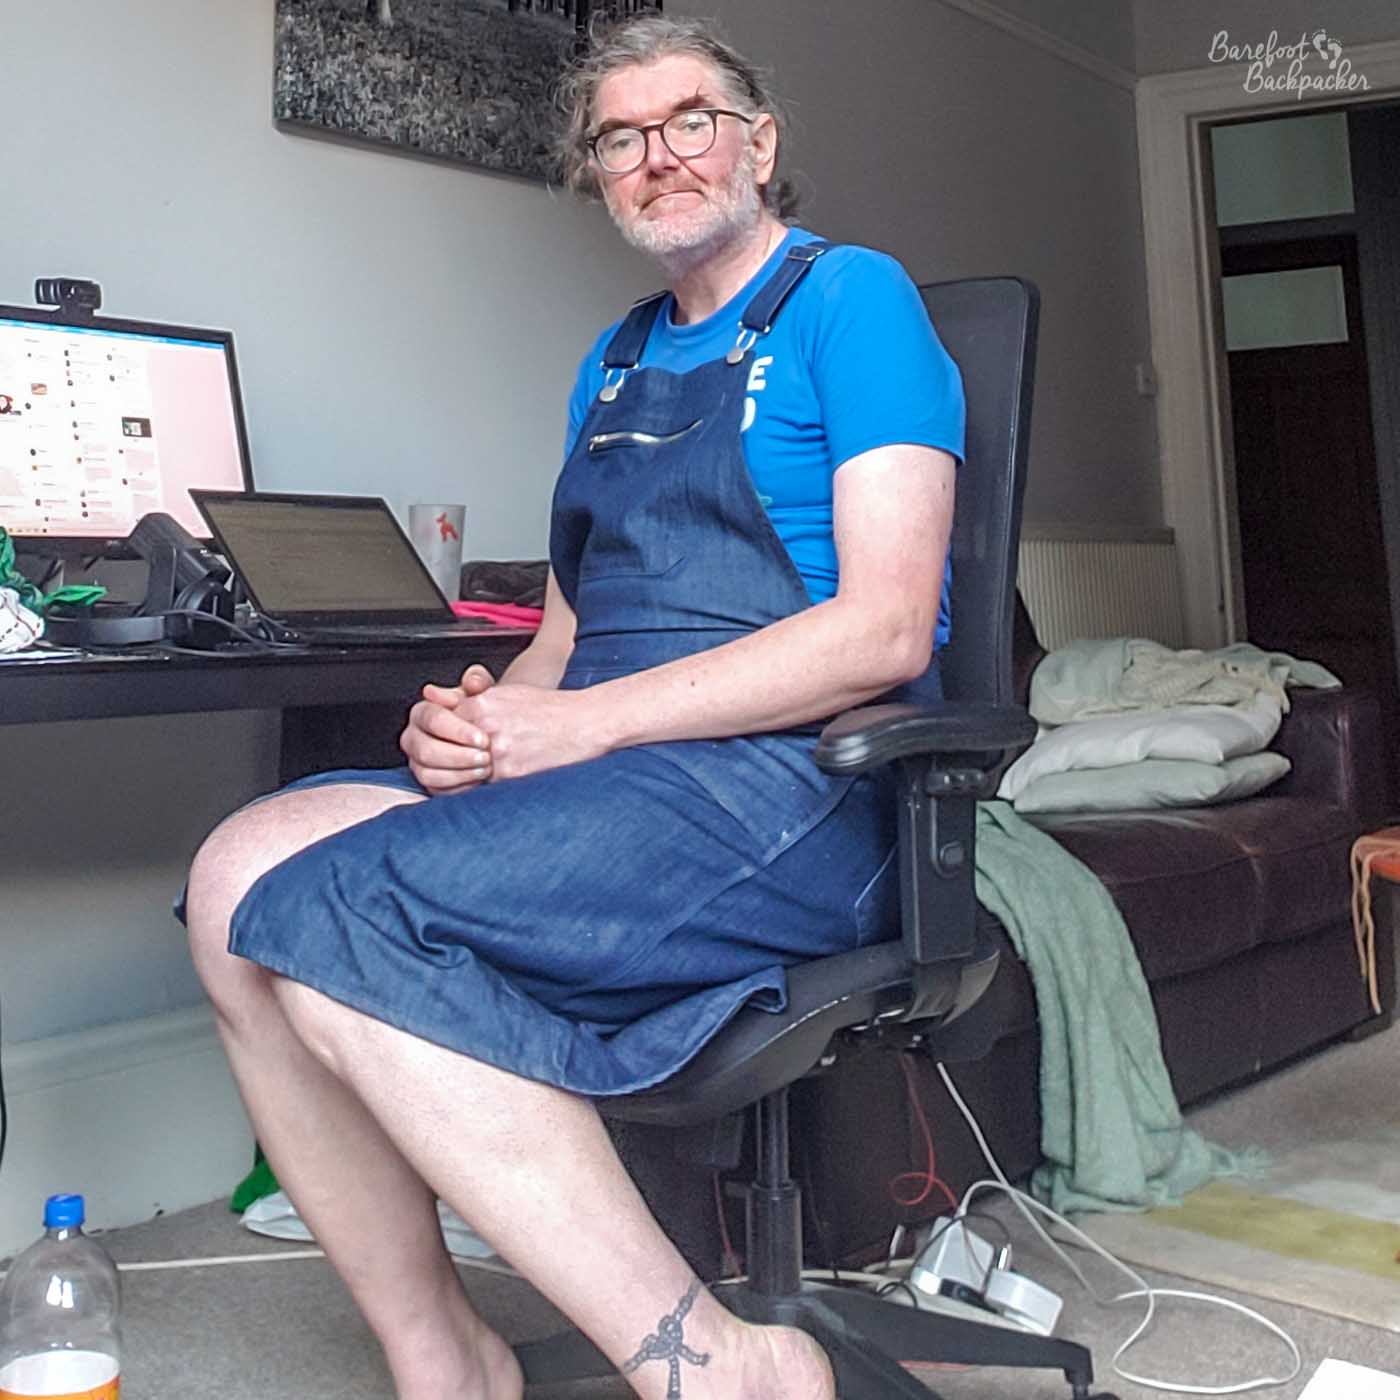 person sat on a chair in a living room, by a computer desk. They're wearing a t-shirt with a denim dungaree dress over it. The dungaree reaches to their knees but there's a dress-like slit in them, revealing more of their leg than dungaree shorts would. They're also barefoot.